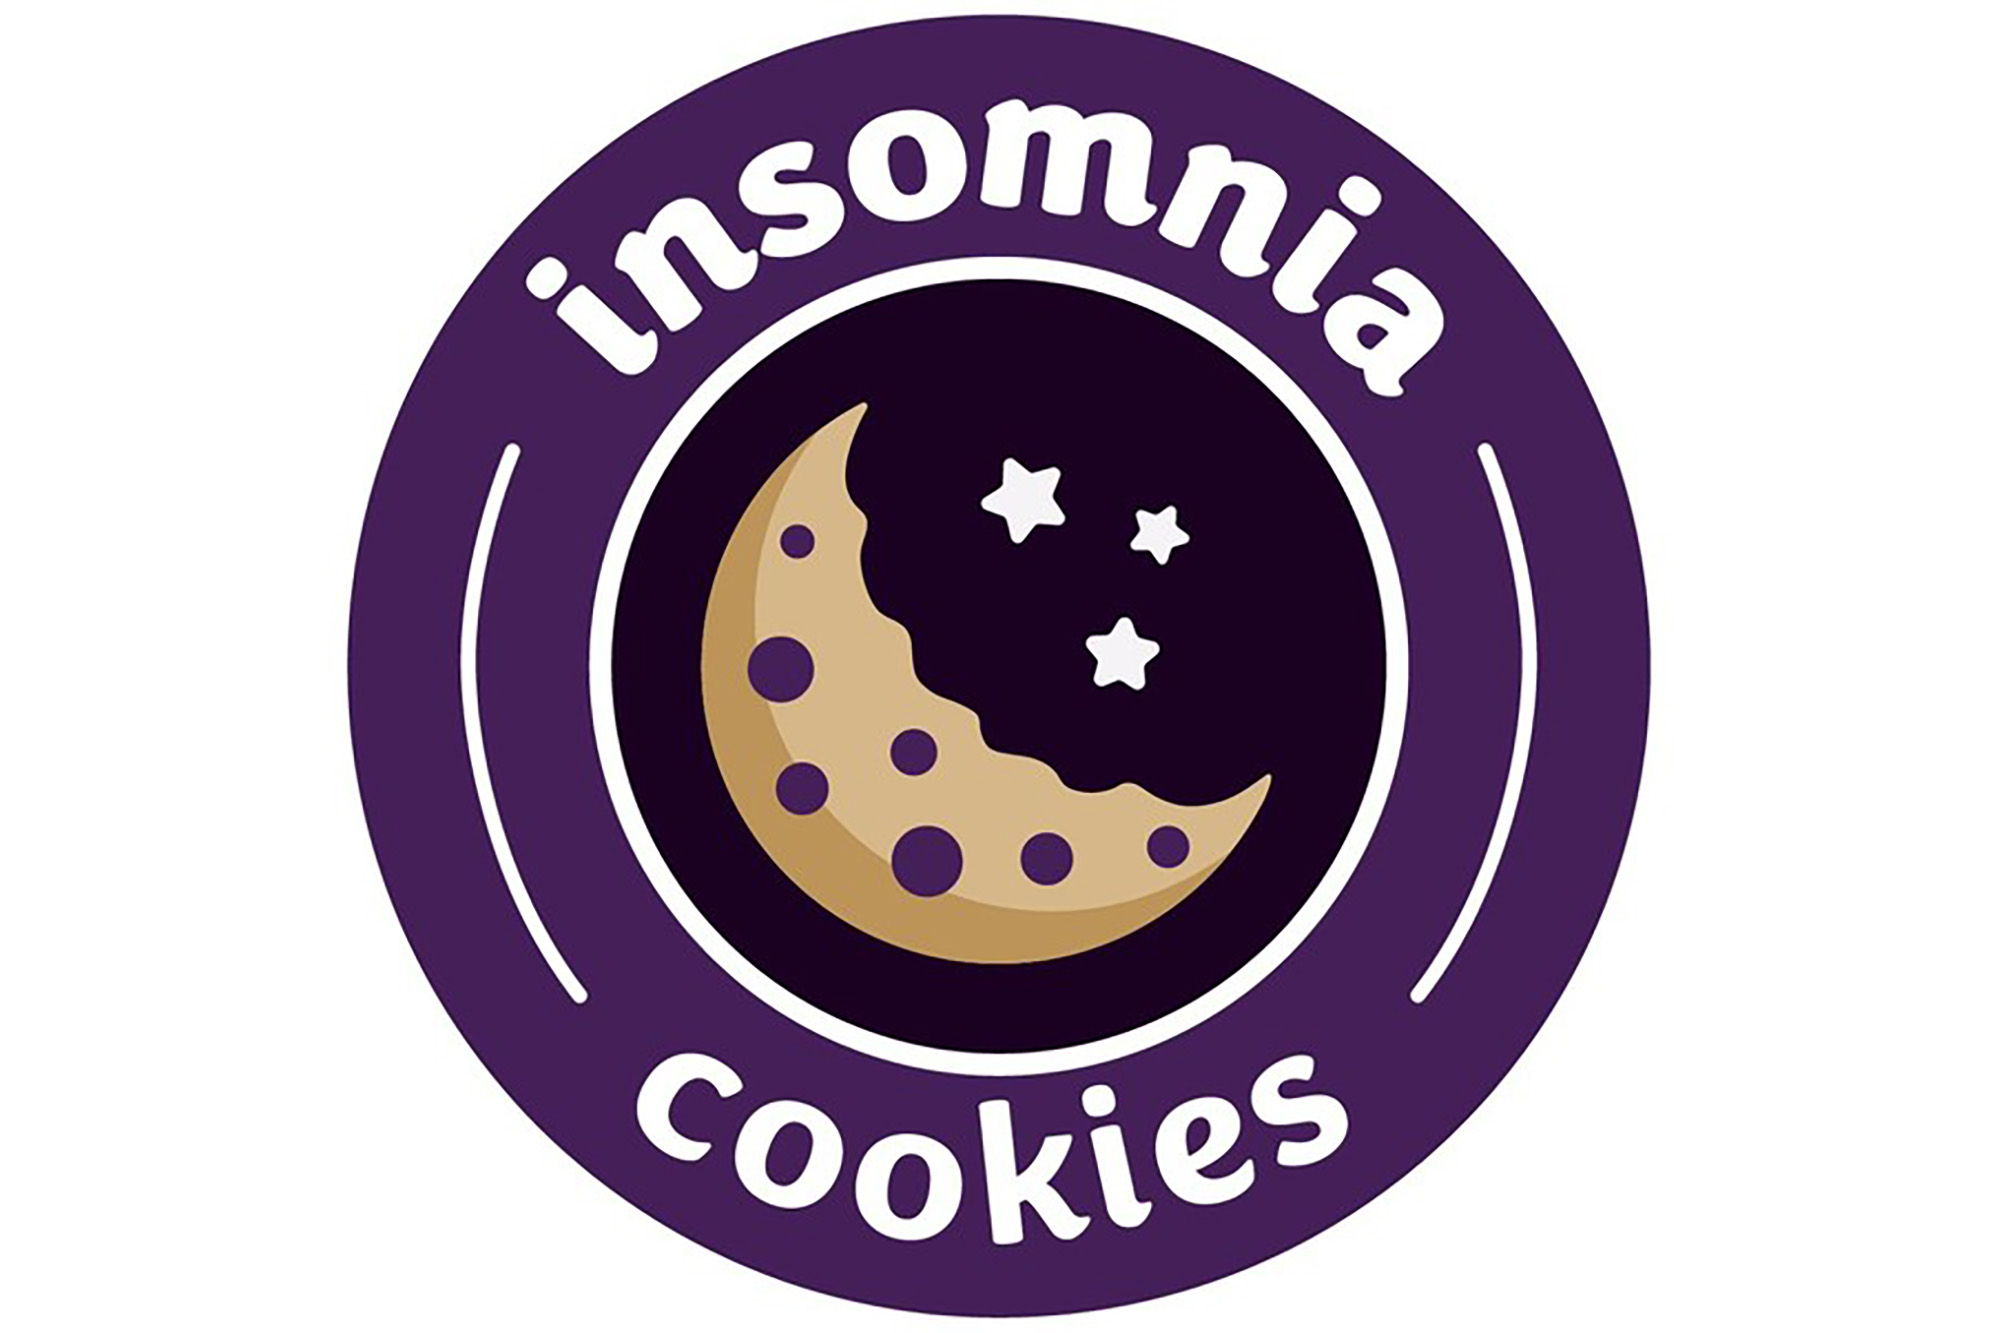 Photo: A white background with the Insomia Cookies logo overlayed. The logo is a purple circle with a half-bitten cookie on the inside, reminiscent of a crescent moon. Three white stars are to the right of the cookie and above the cookie it reads "insomnia" and below, "cookies".